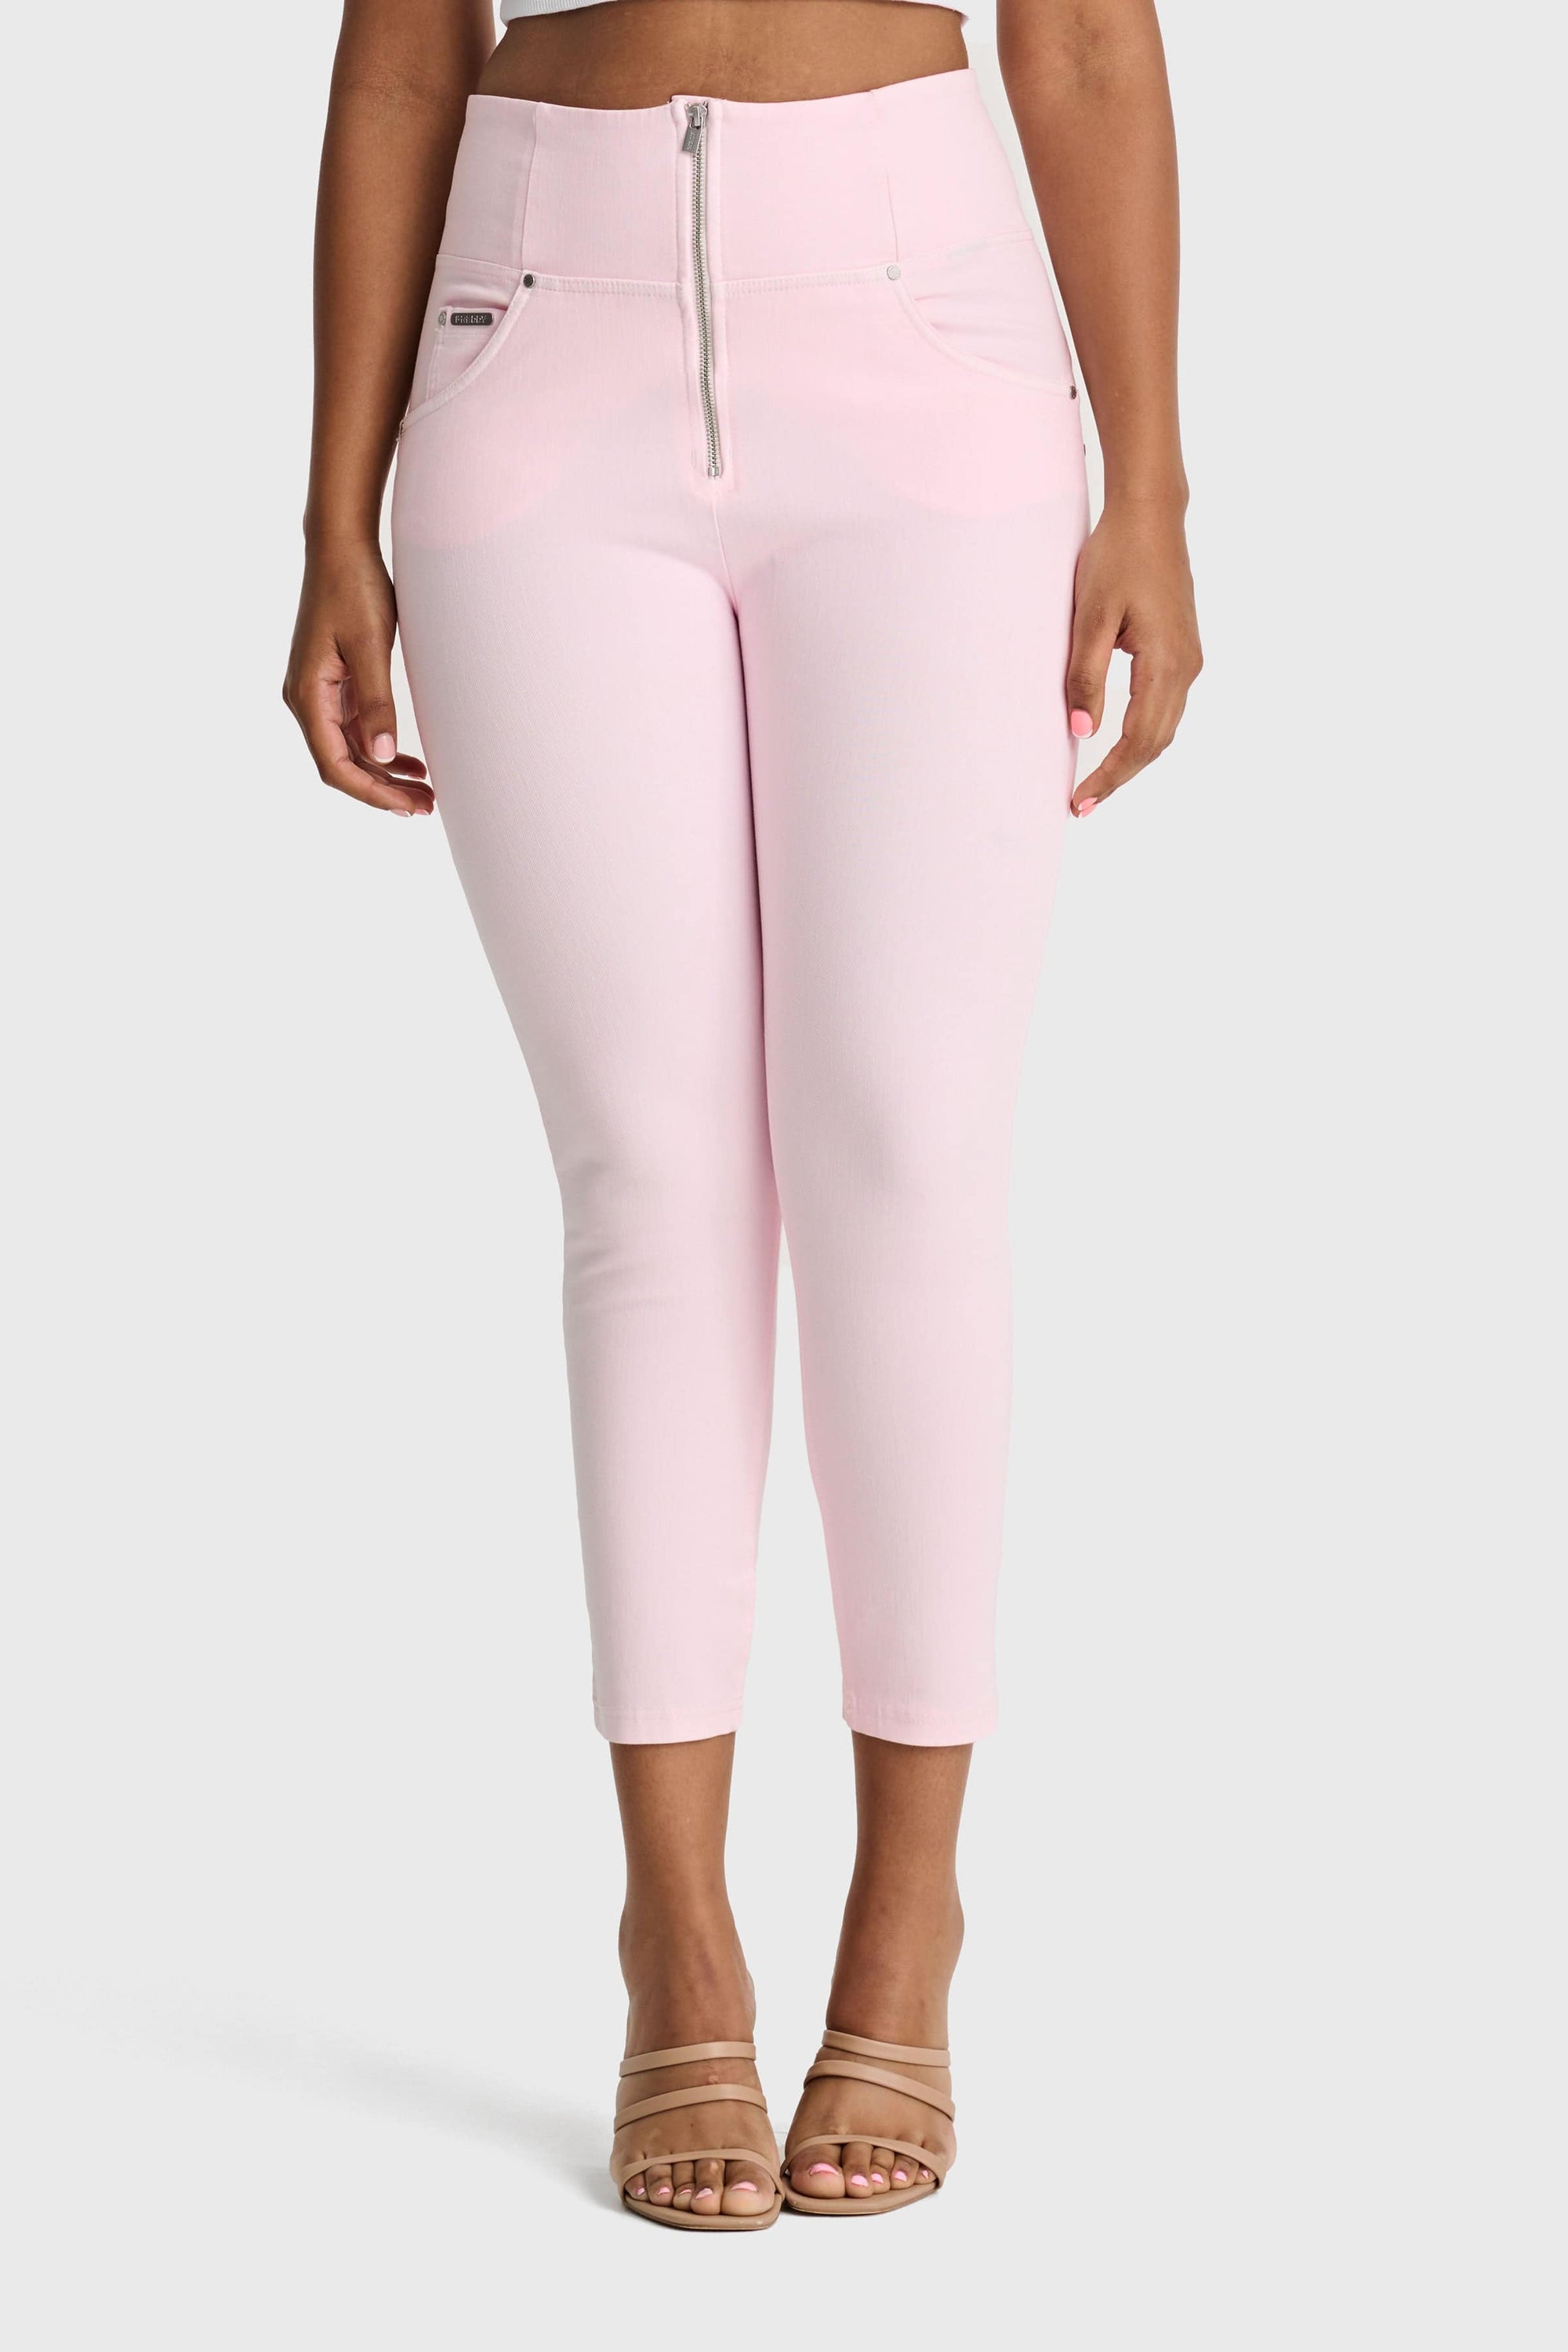 WR.UP® Snug Curvy Jeans - High Waisted - Petite Length - Baby Pink 5